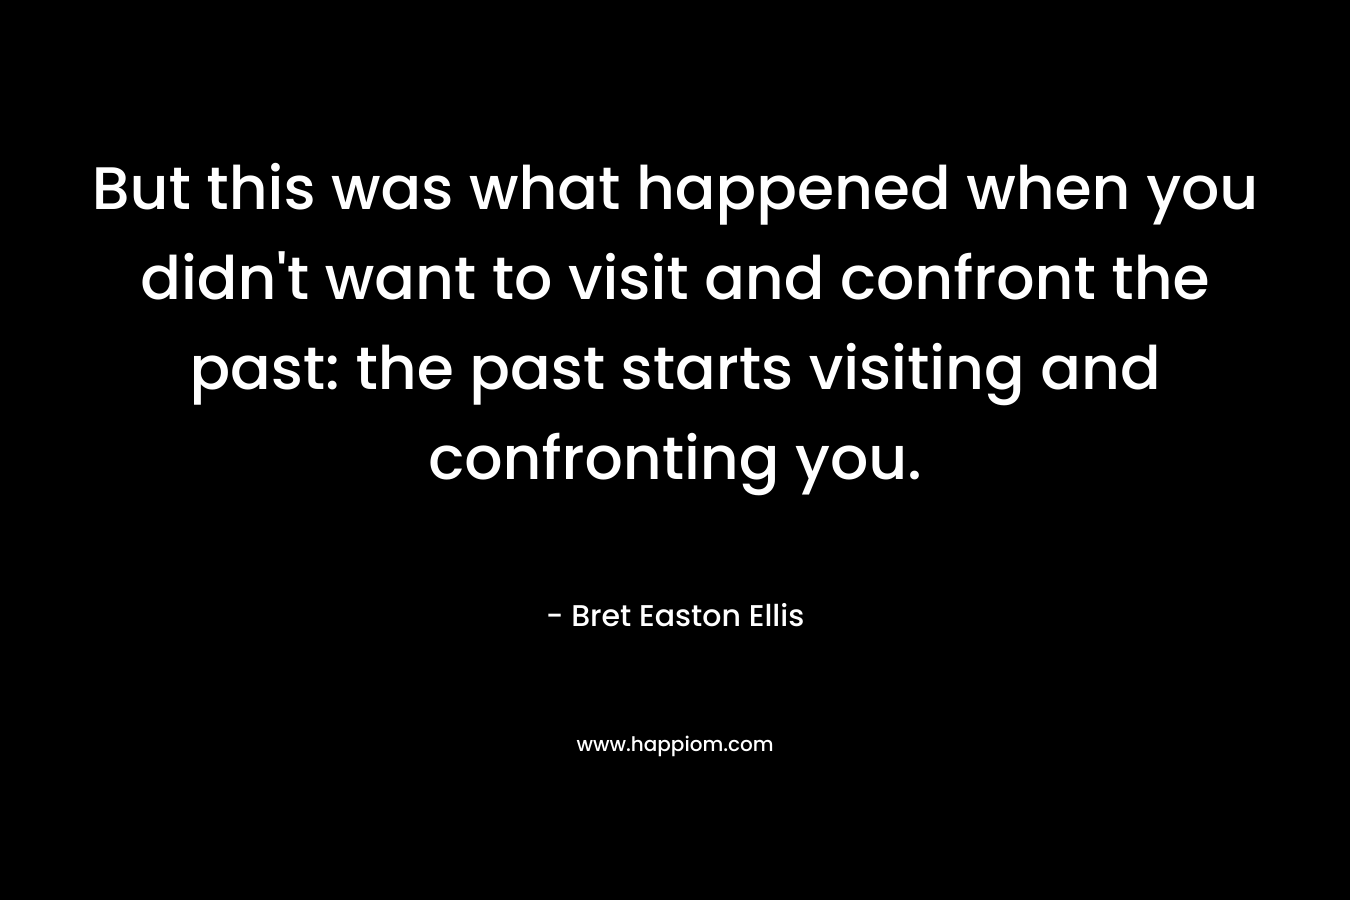 But this was what happened when you didn’t want to visit and confront the past: the past starts visiting and confronting you. – Bret Easton Ellis